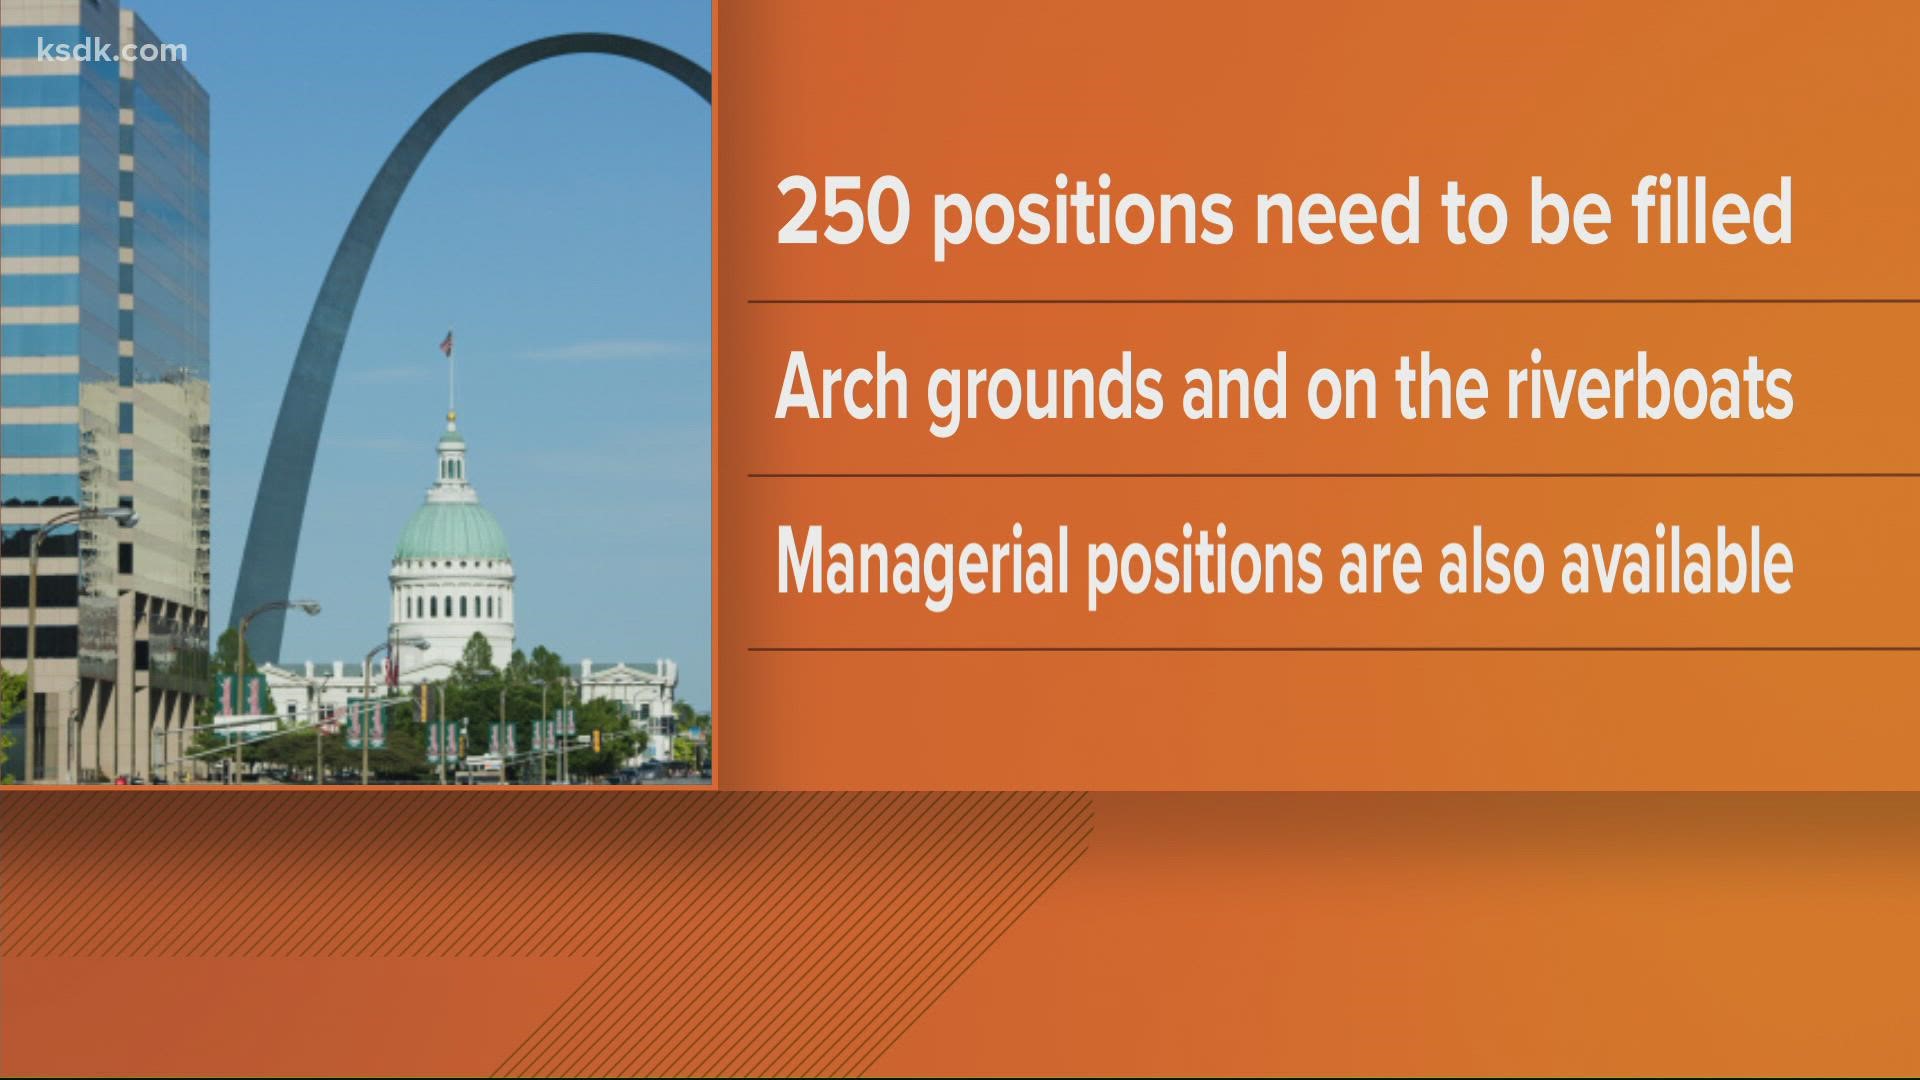 Open positions at the Arch include tour guides and ticket sales agents, as well as managerial positions such as the Arch Director of Operations.